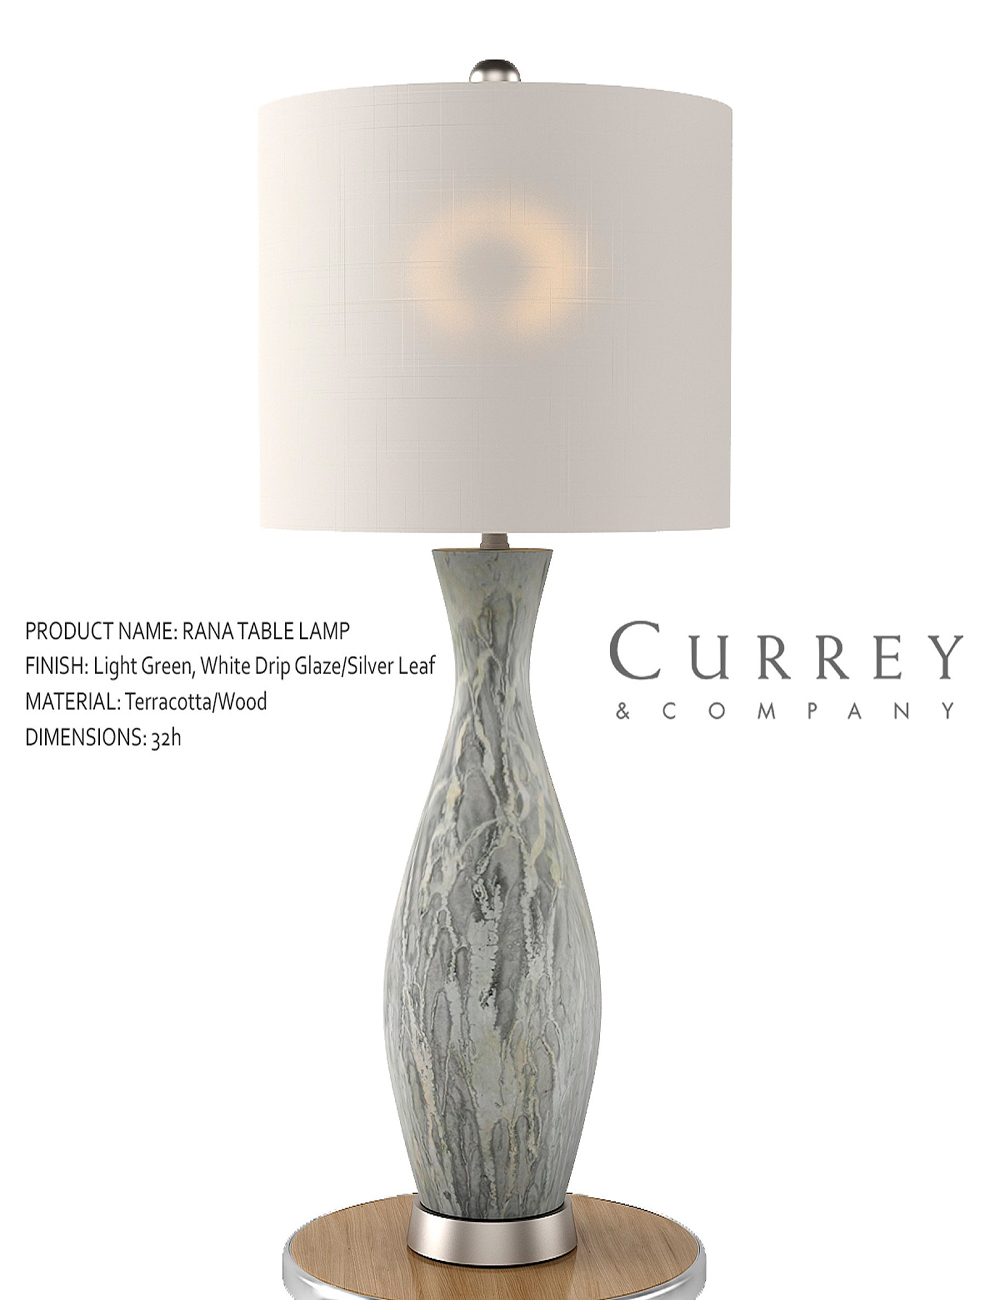 Rendering of a beautiful 3d model of a table lamp